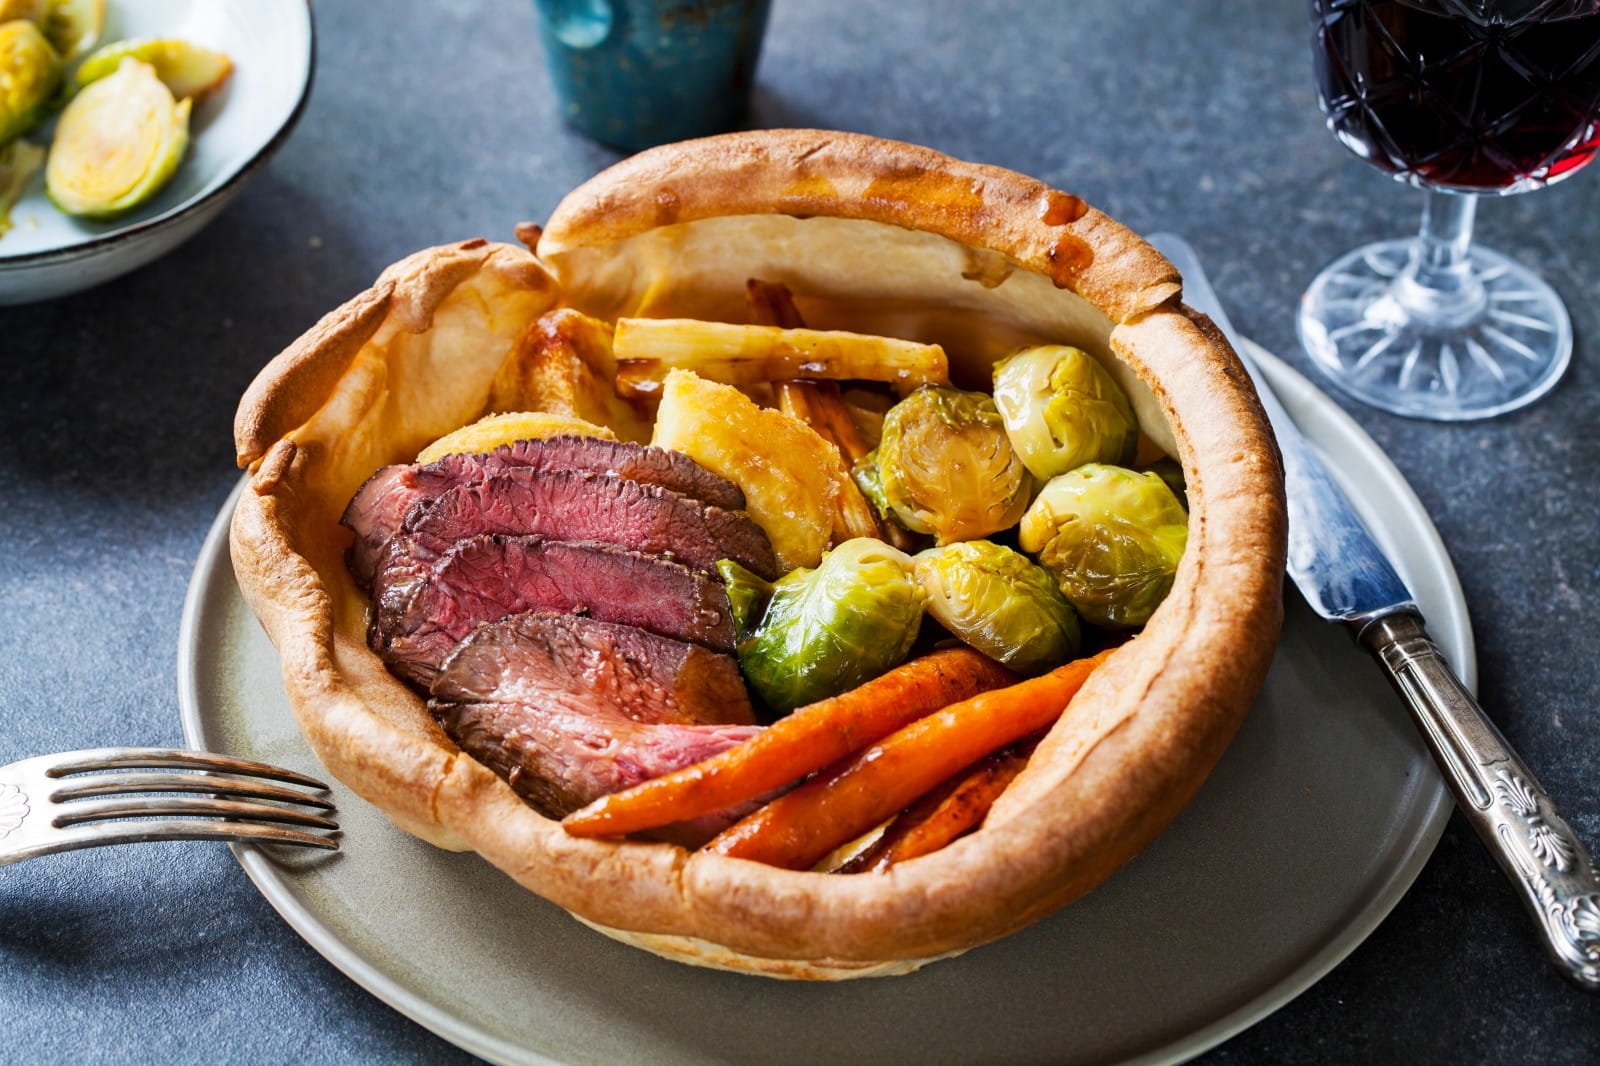 A quick guide to wine pairings with a Sunday roast